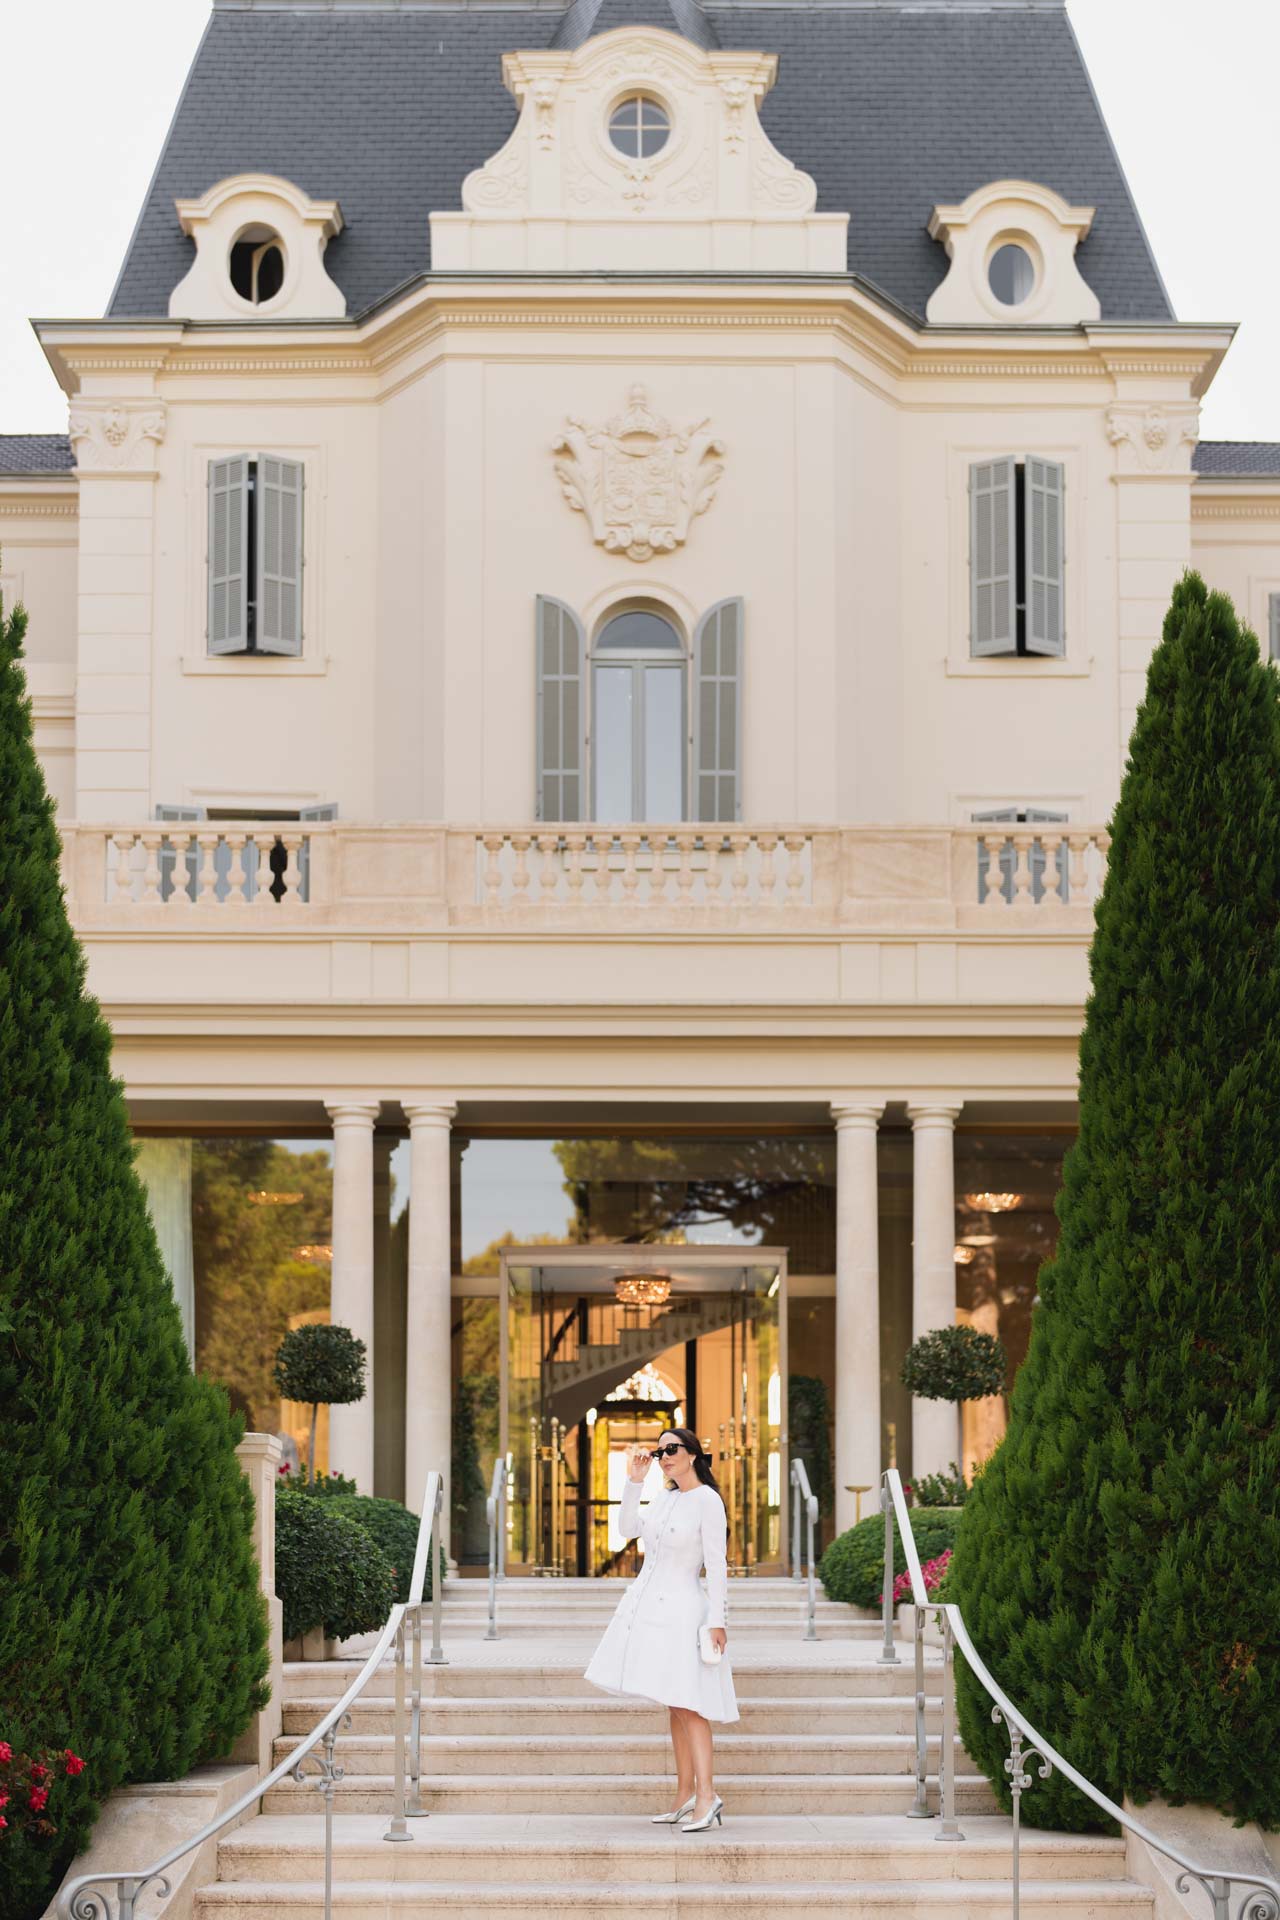 Rachel and Erez: A “Return to the Age of Elegance” on the French Riviera :: 1